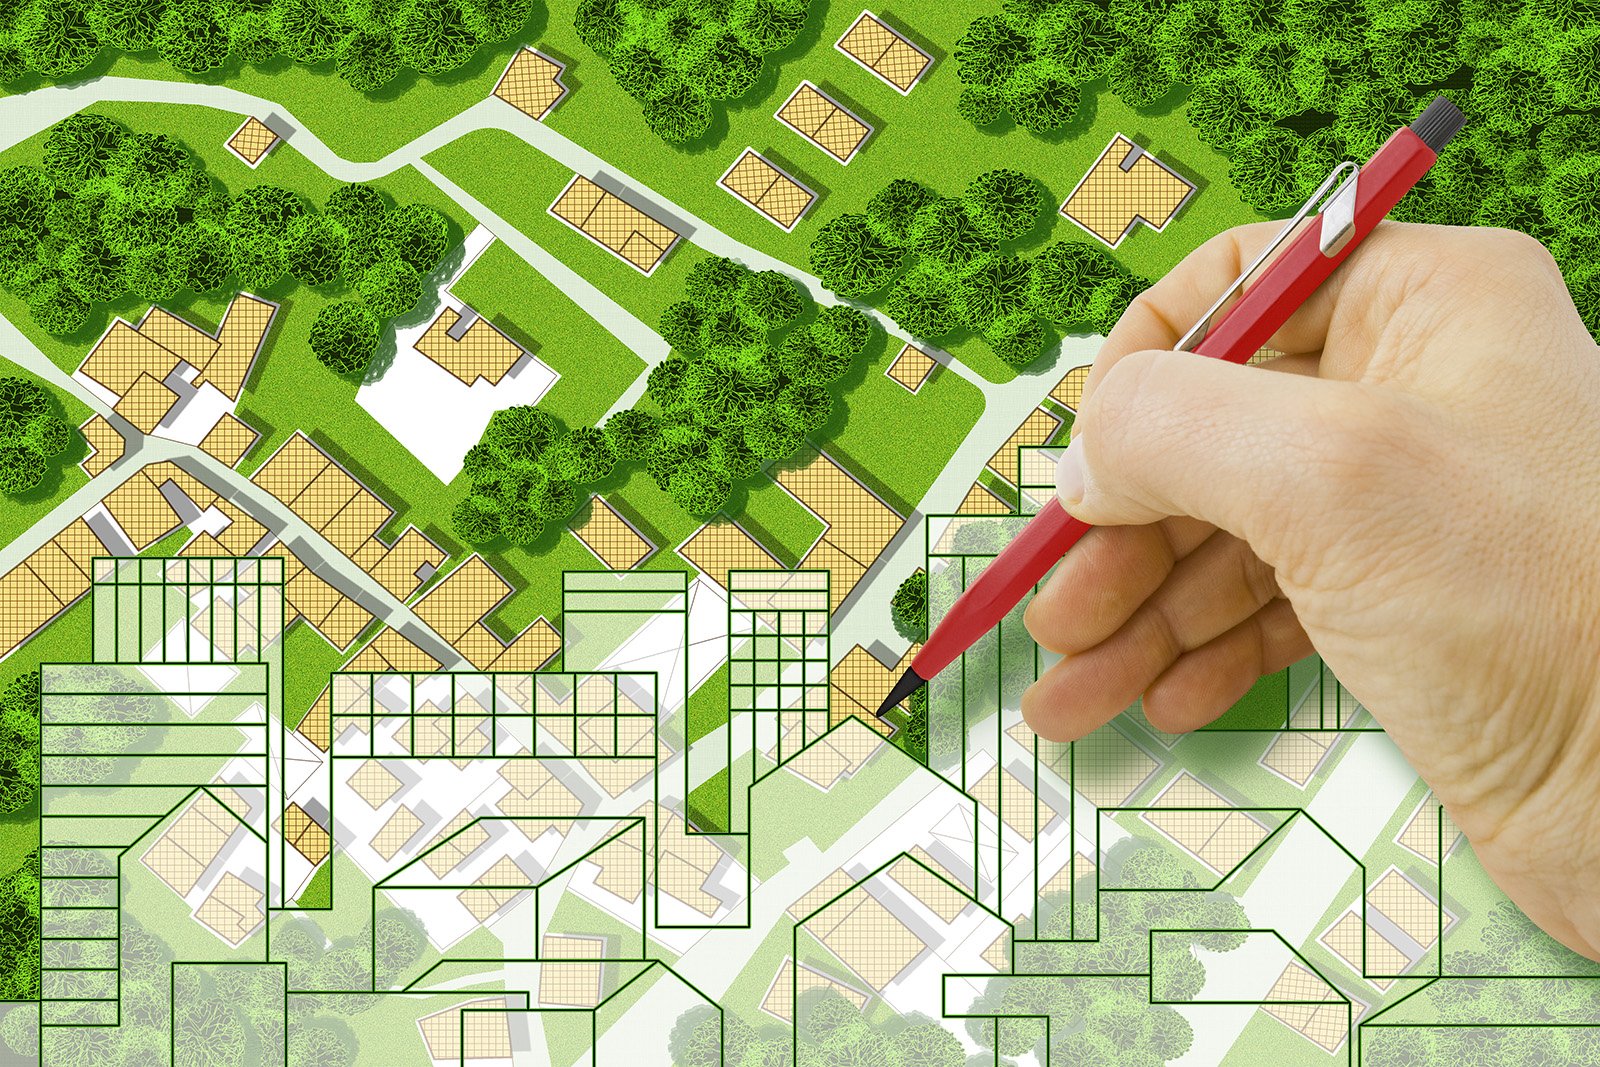 White and green image of a map of a neighbourhood with a hand holding a pencil to draw on the image.